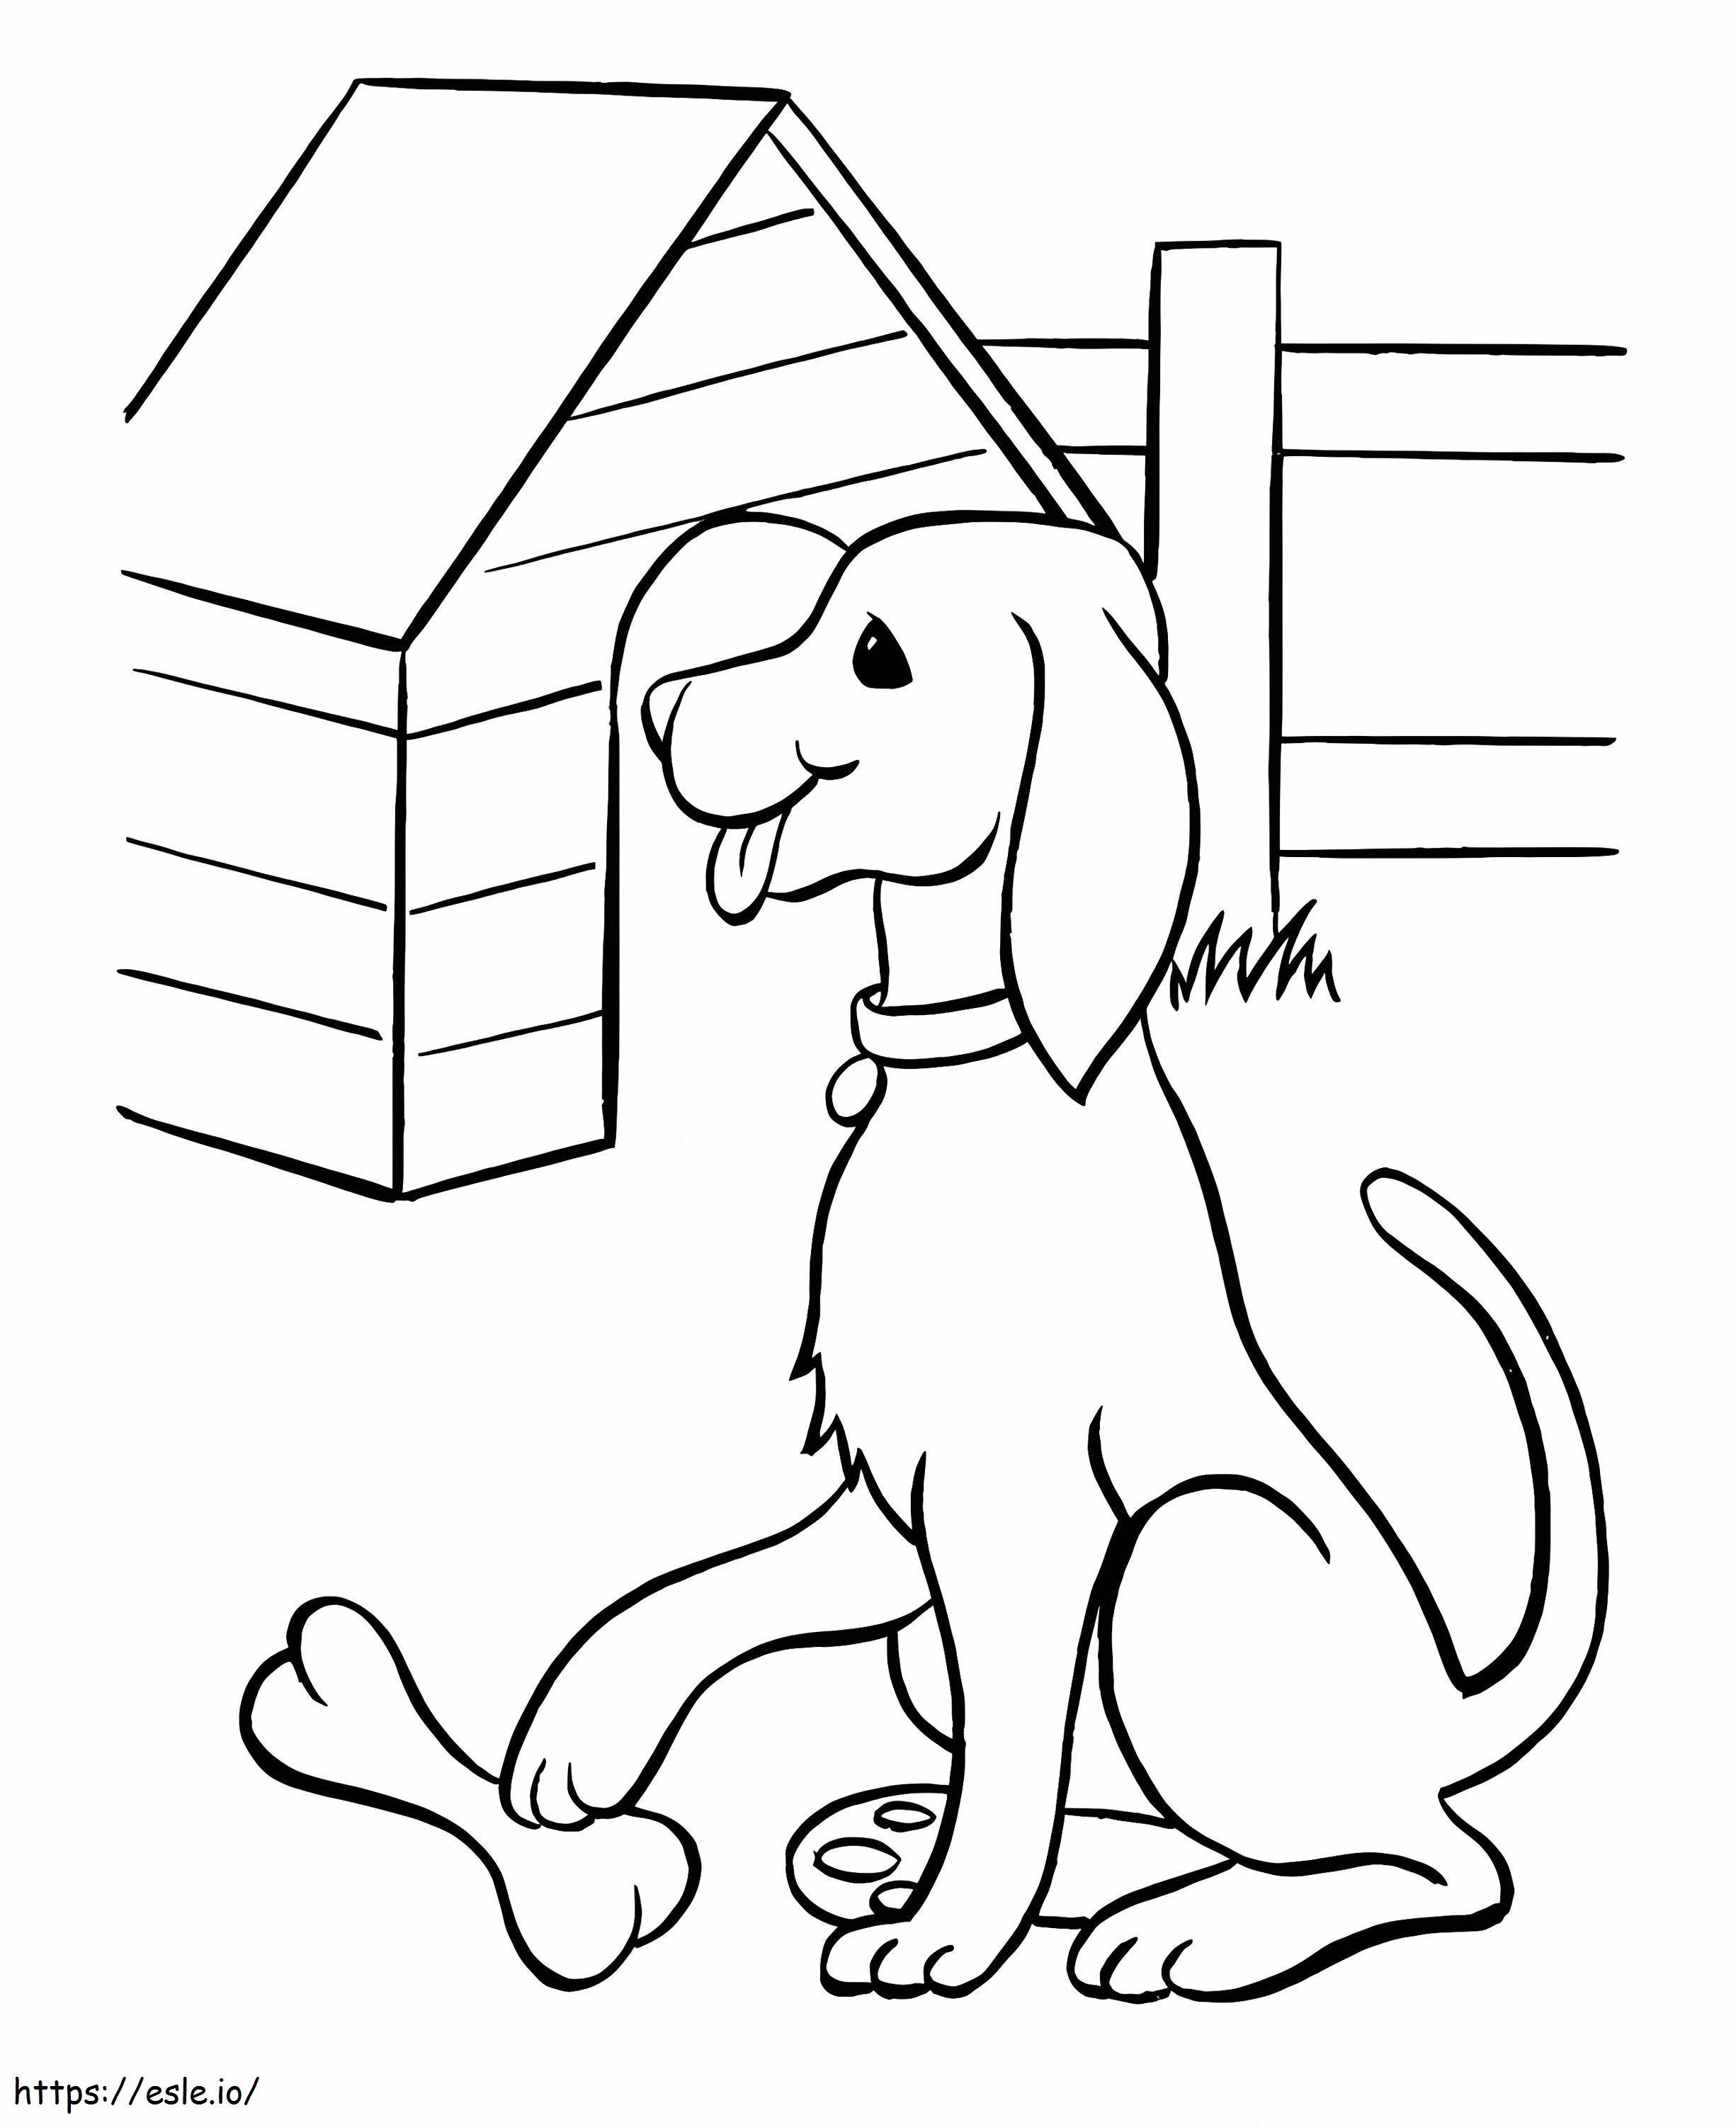 Dog With Dog House coloring page